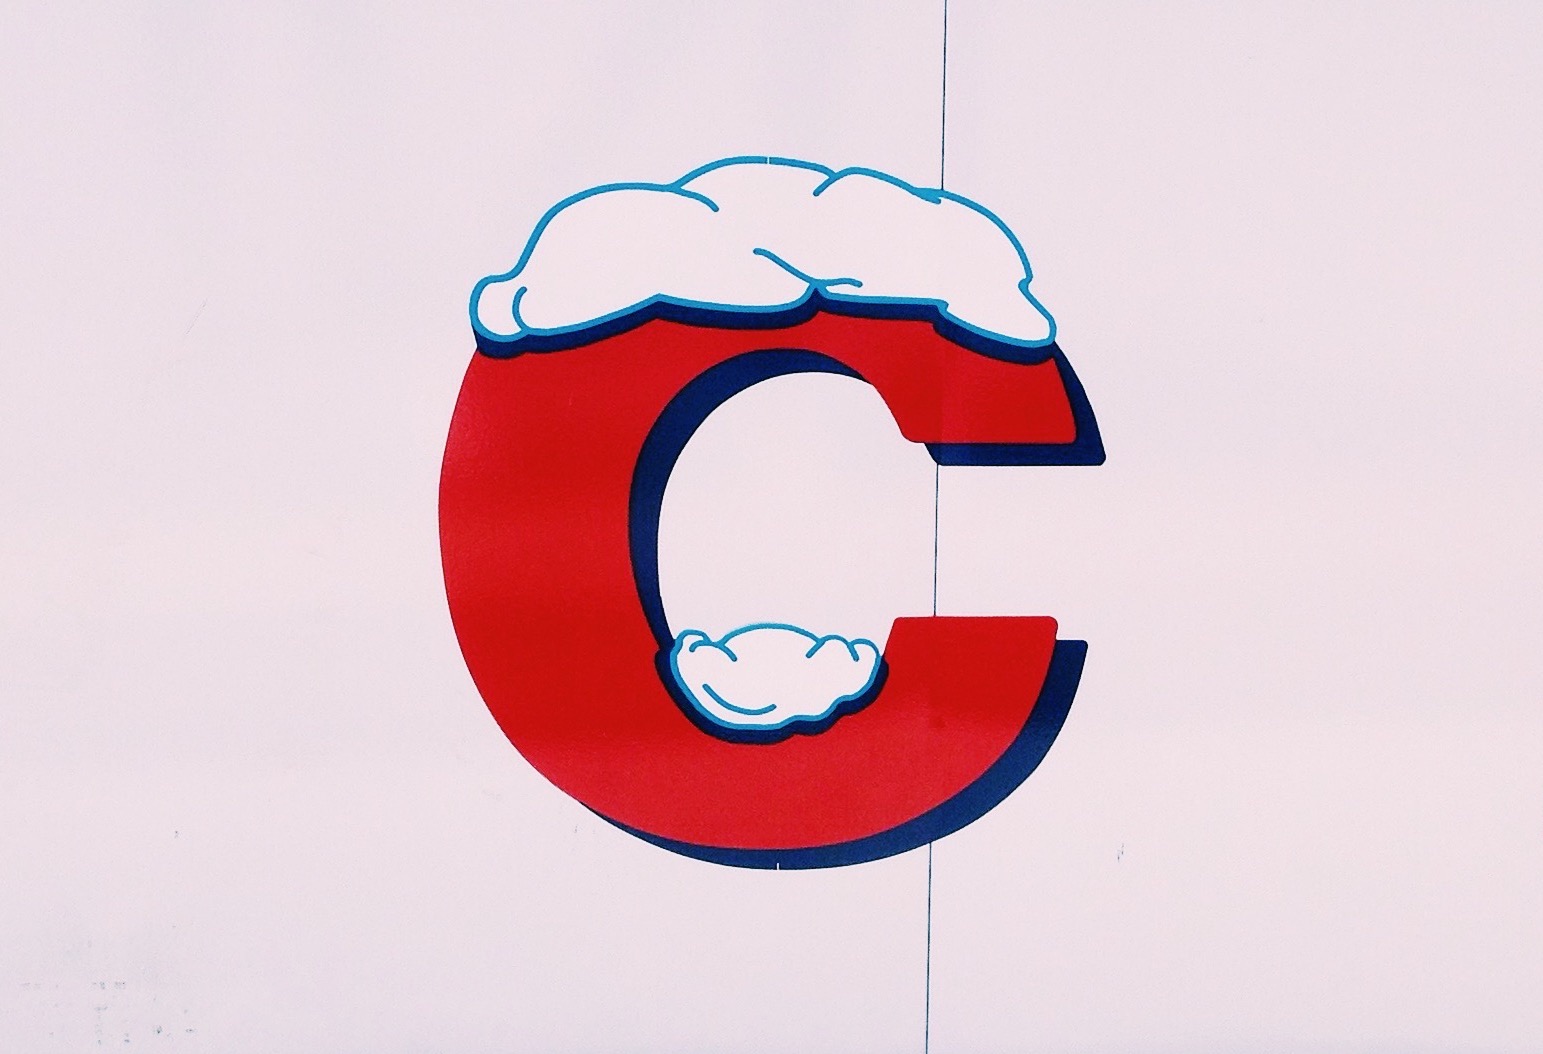 Giant red-colored letter C with snow on top made to represent the three Cs of credit